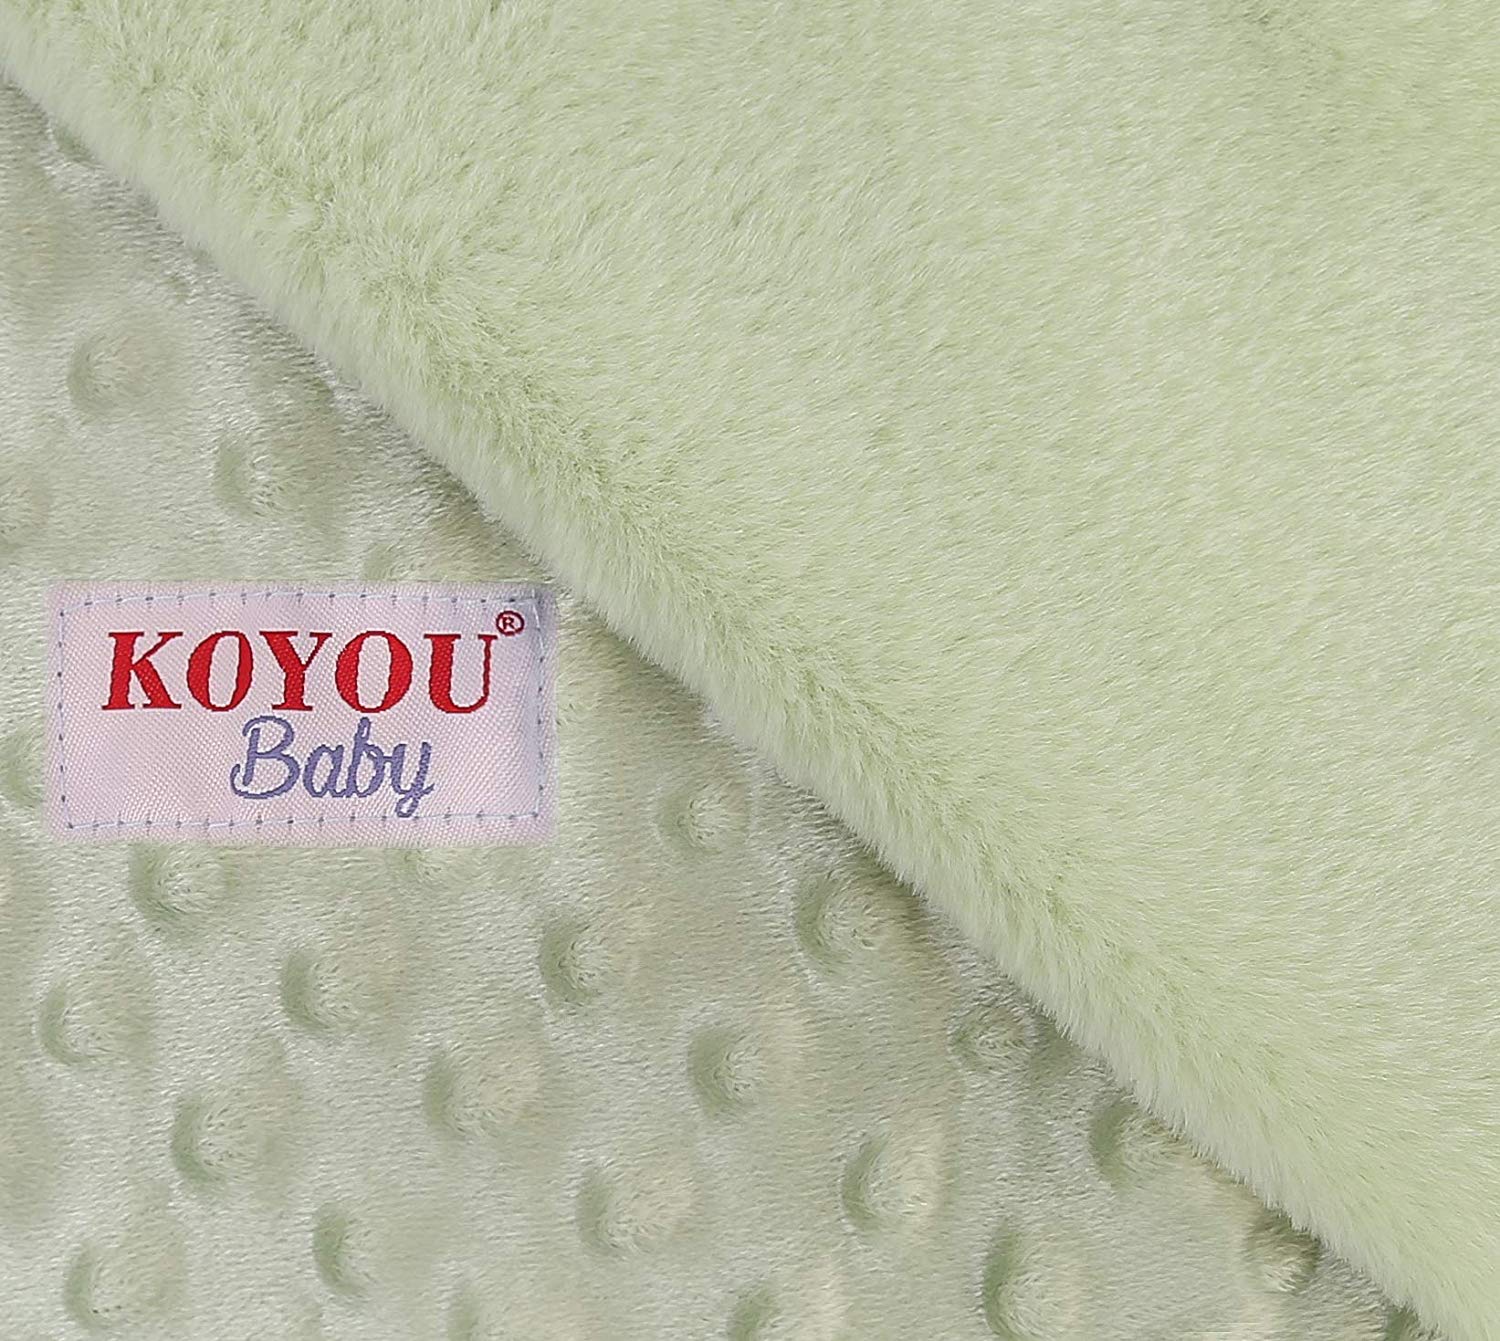 KOYOU BABY - Soft Plush Mink Baby Blanket with Dotted Backing and Silky Trim (30 X 35) - image 2 of 3